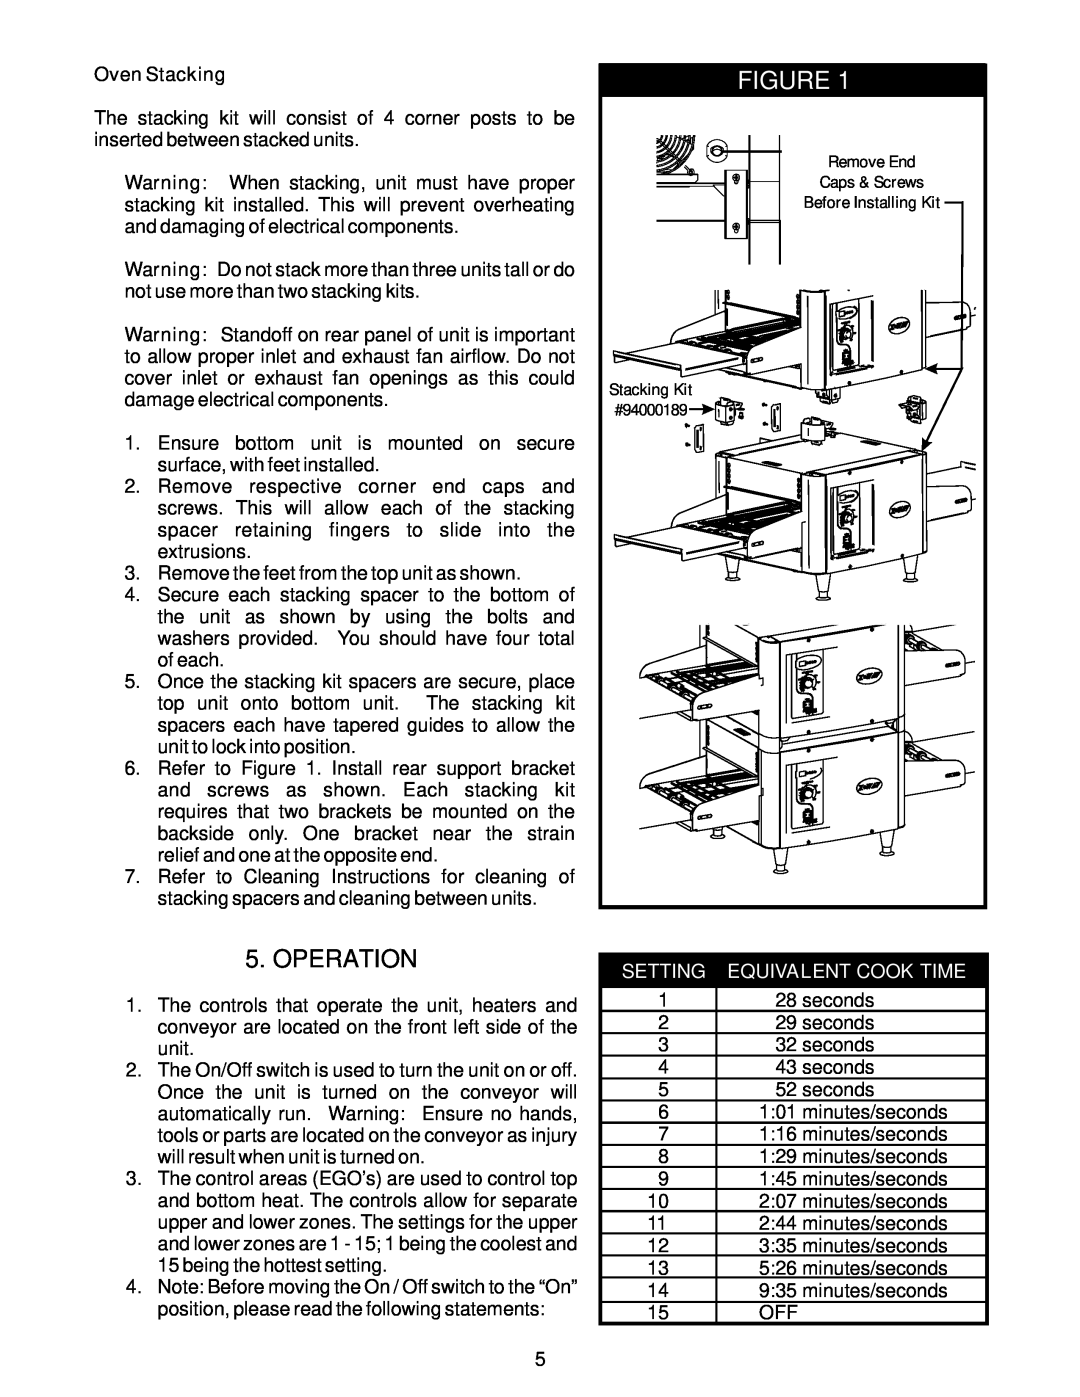 APW Wyott RANSI/NSF4 operating instructions Operation, Setting, Equivalent Cook Time, Oven Stacking 